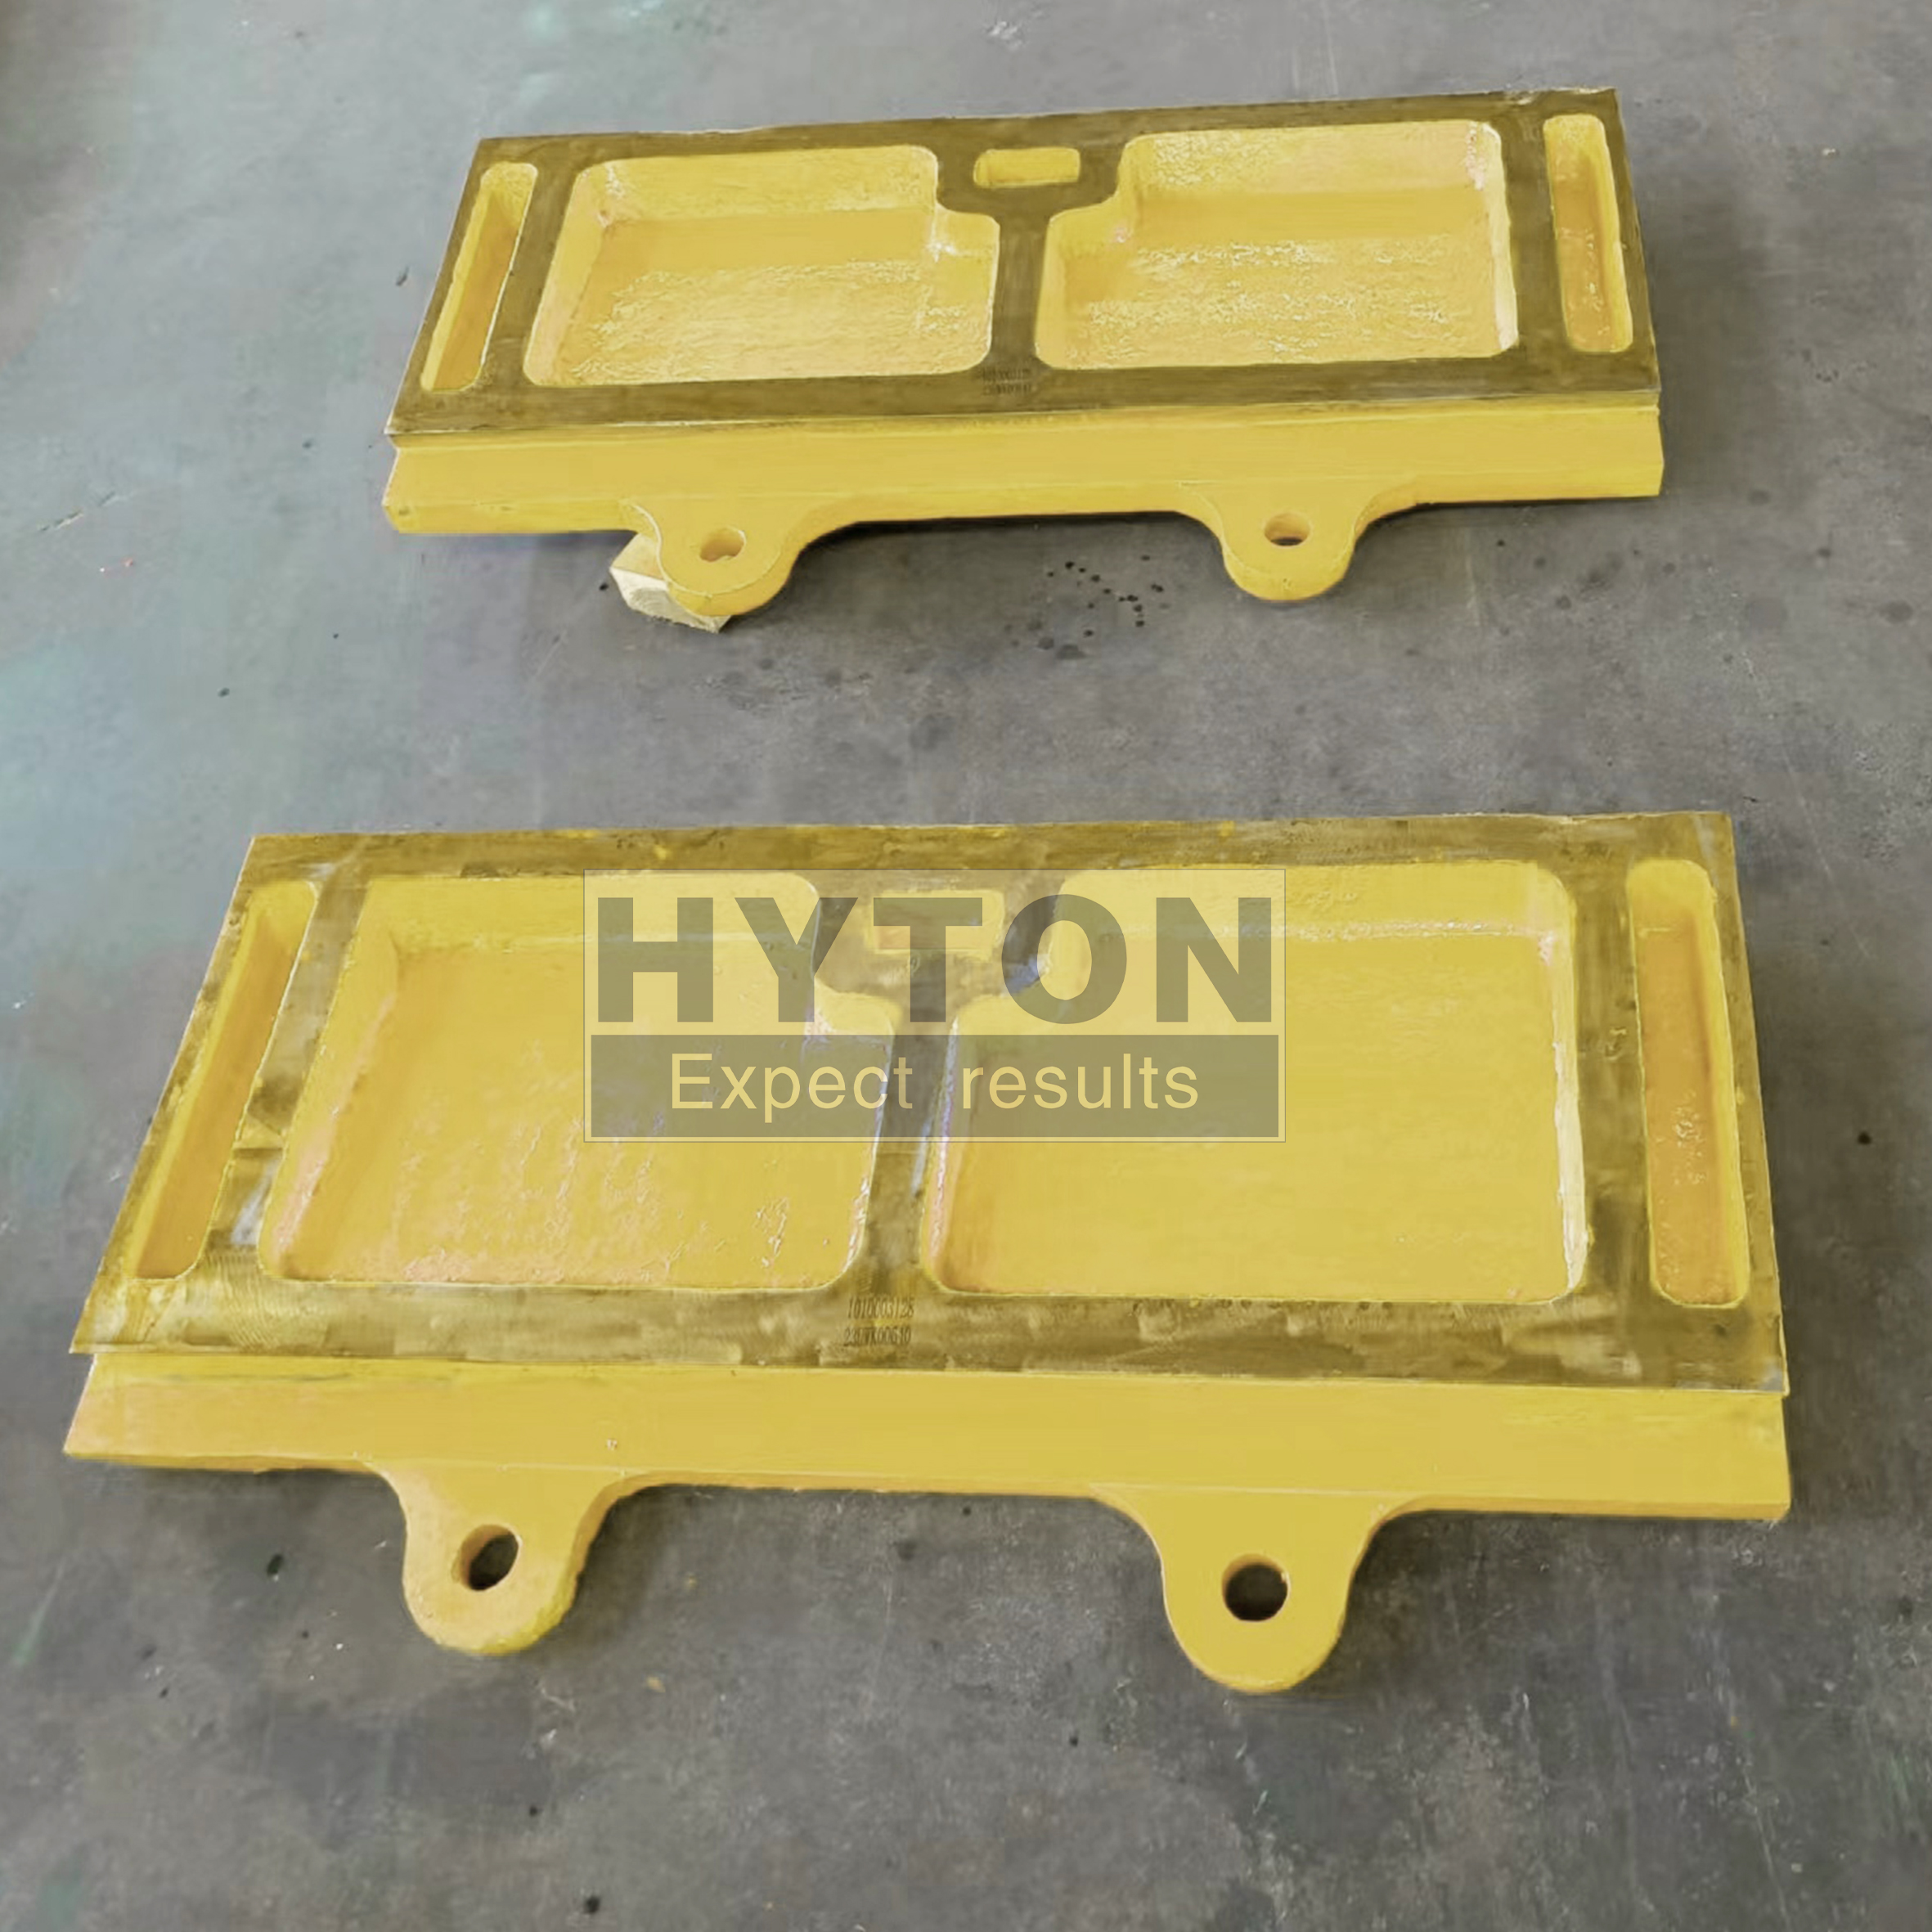 Accessory Deflector Plate Fit for Sandvik CJ409 Mobile Jaw Crusher 